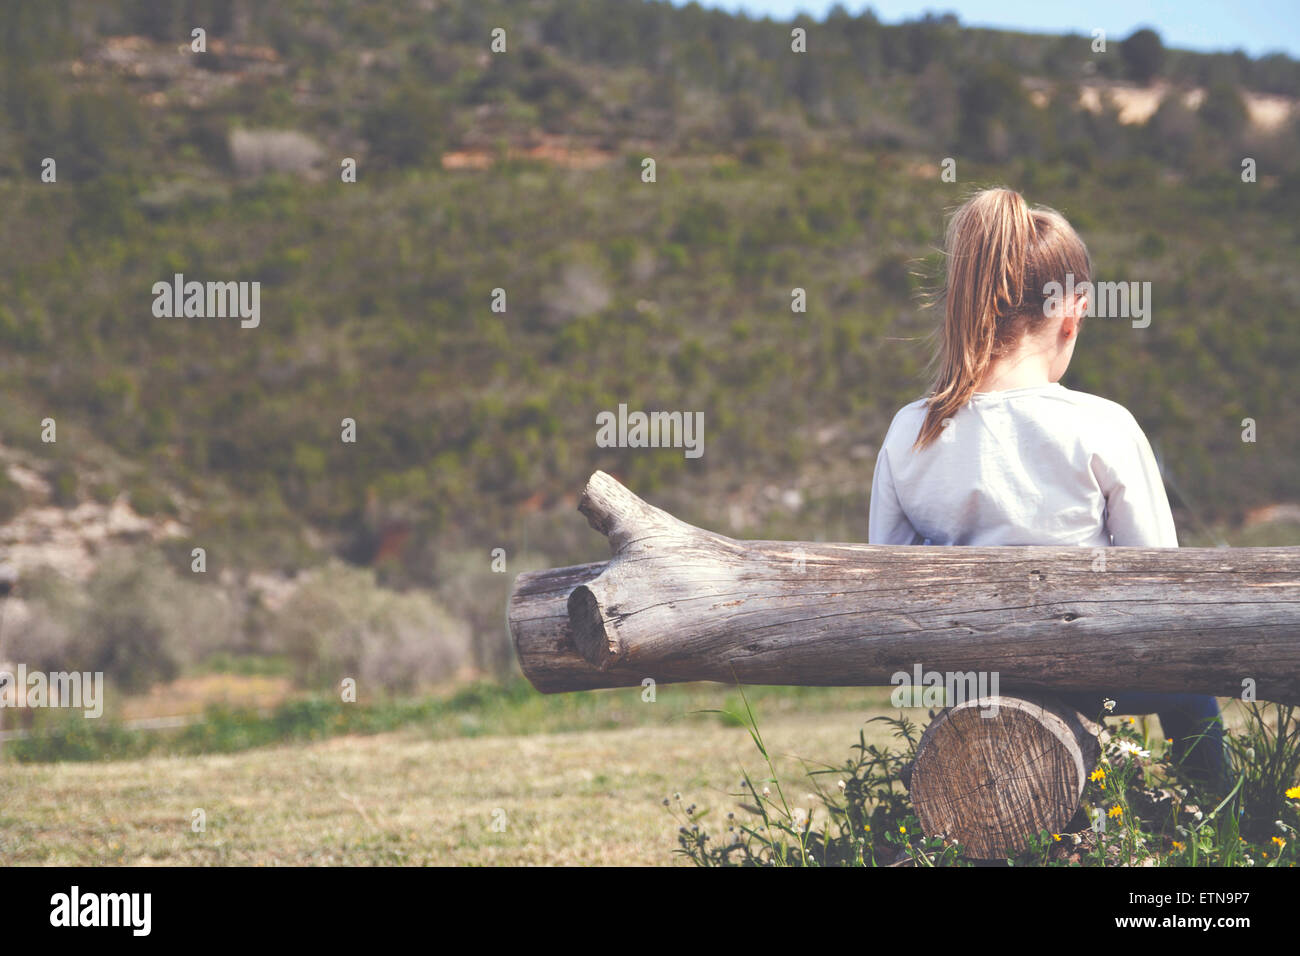 Rear view of a girl leaning against a tree trunk Stock Photo